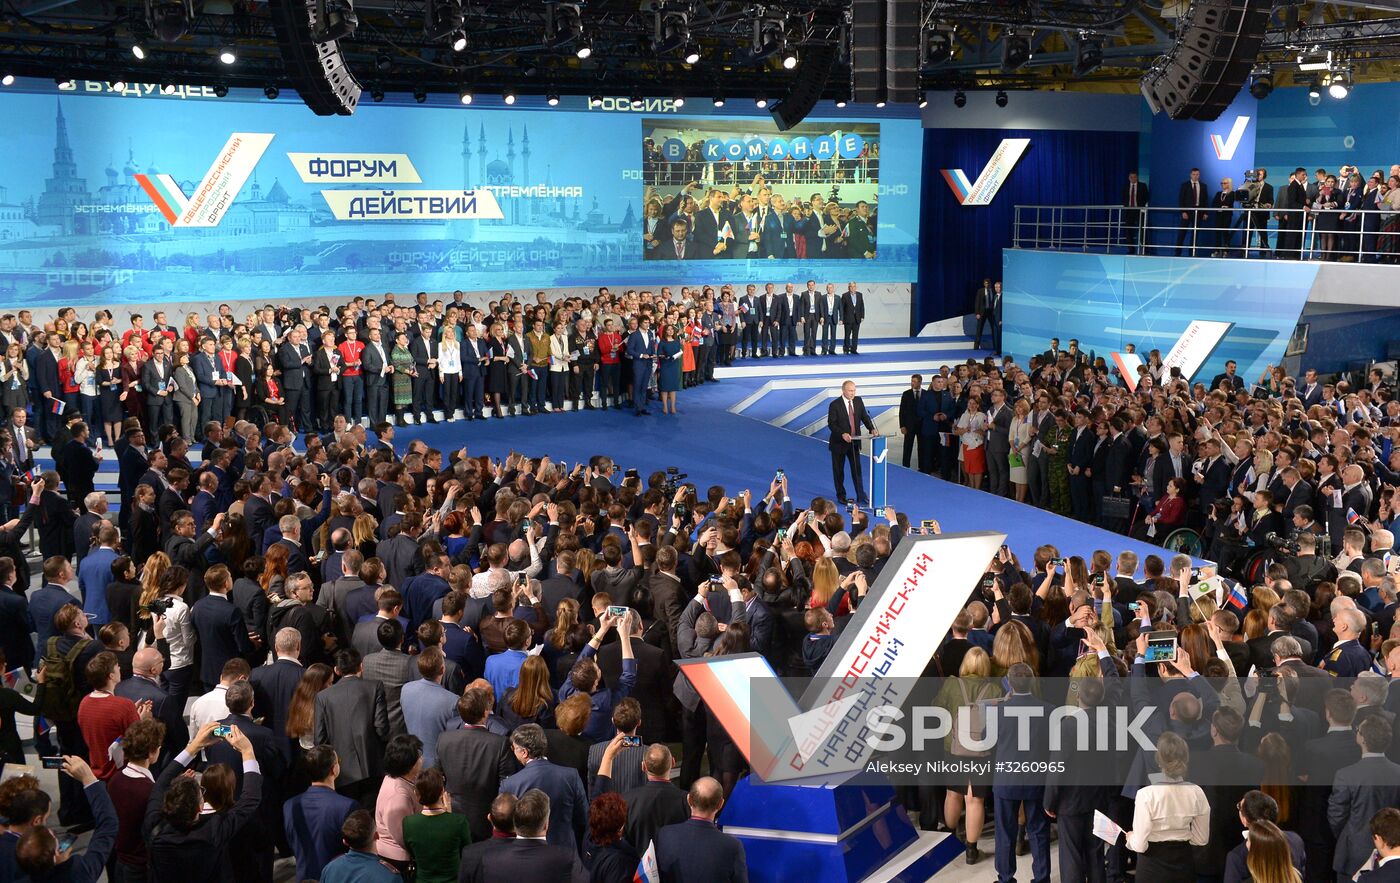 Vladimir Putin attends All-Russia People's Front Forum Russia Headed into the Future